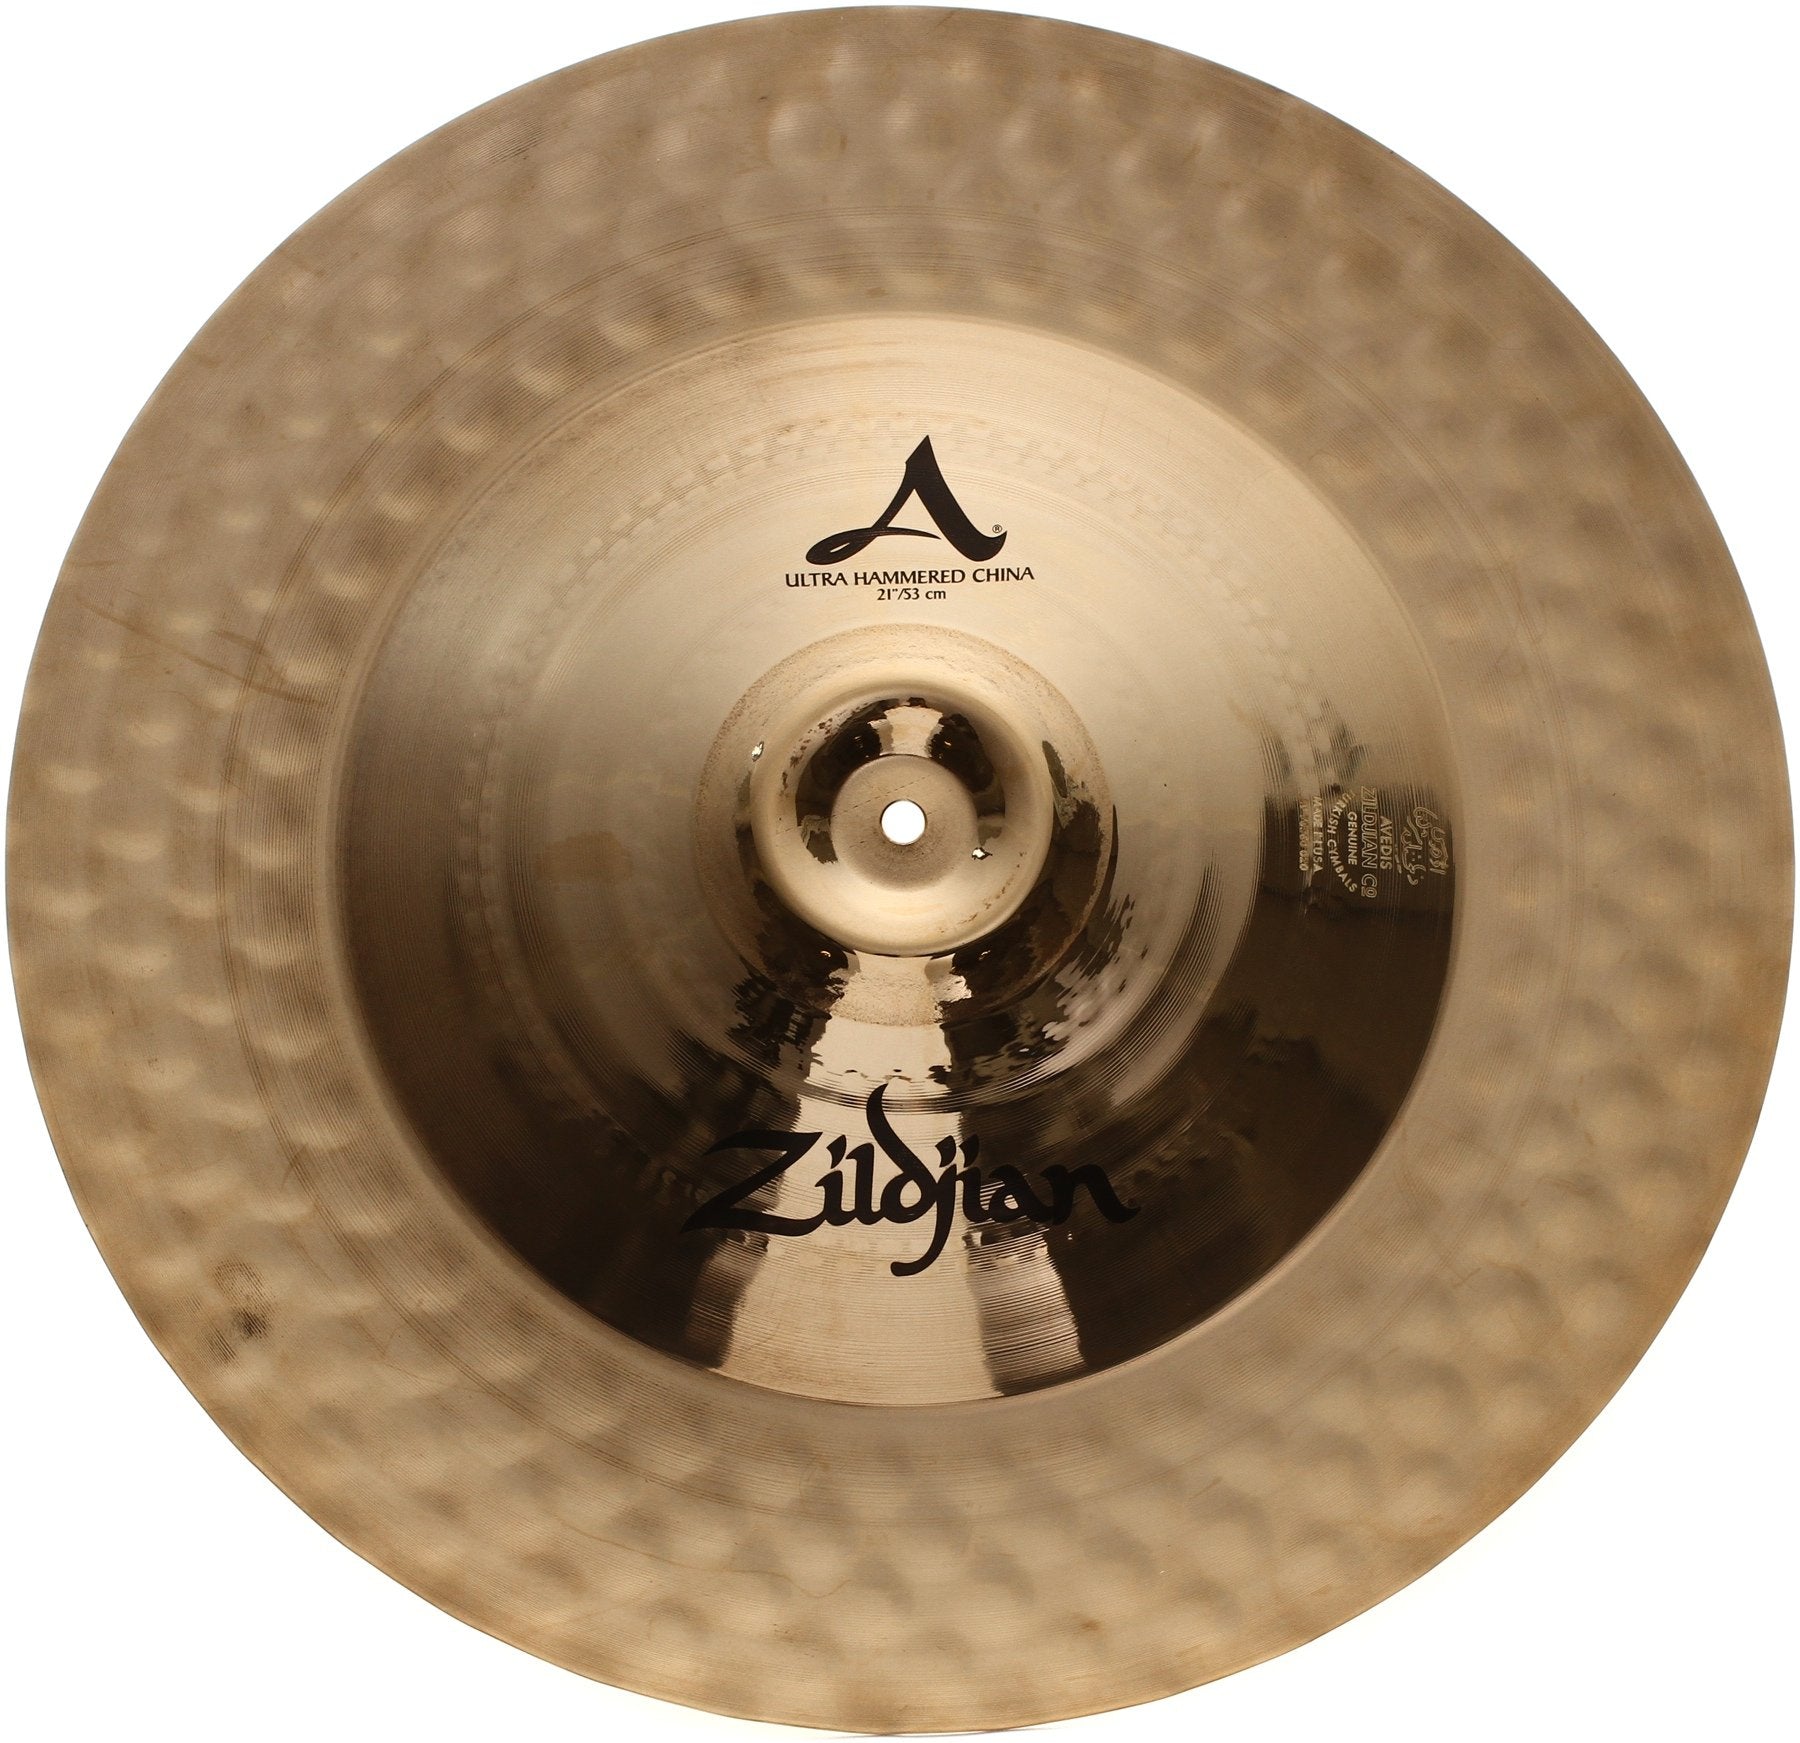 ZILDJIAN A Ultra Hammered China Cymbal (Available in 19" & 21")